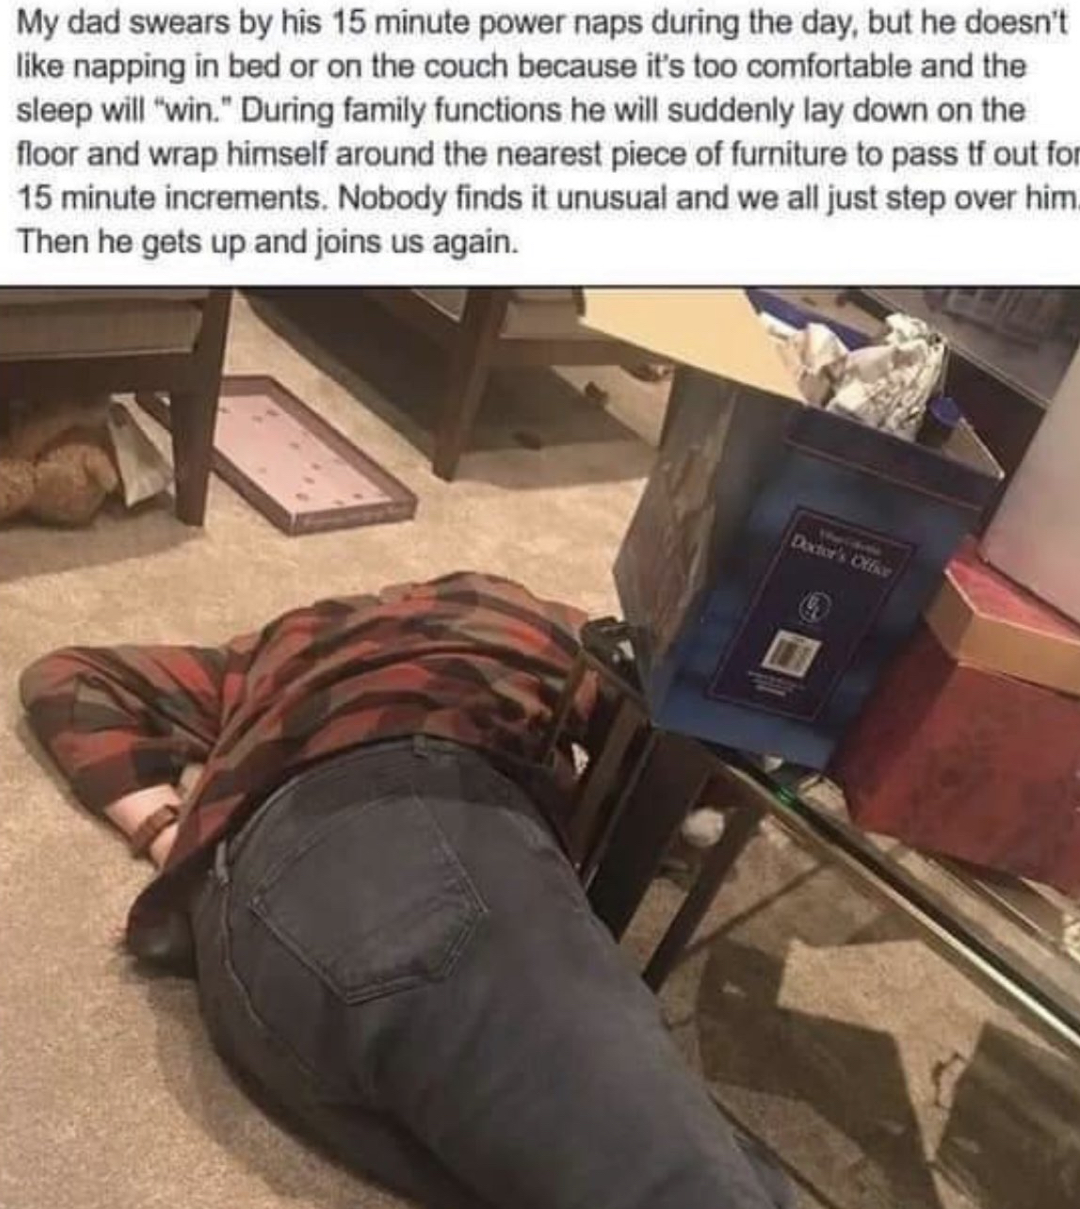 Dudes posting their wins - floor - My dad swears by his 15 minte power naps during the day, but he doesn't napping in bed or on the couch because it's too comfortable and the sleep will "win." During family functions he will suddenly lay down on the floor